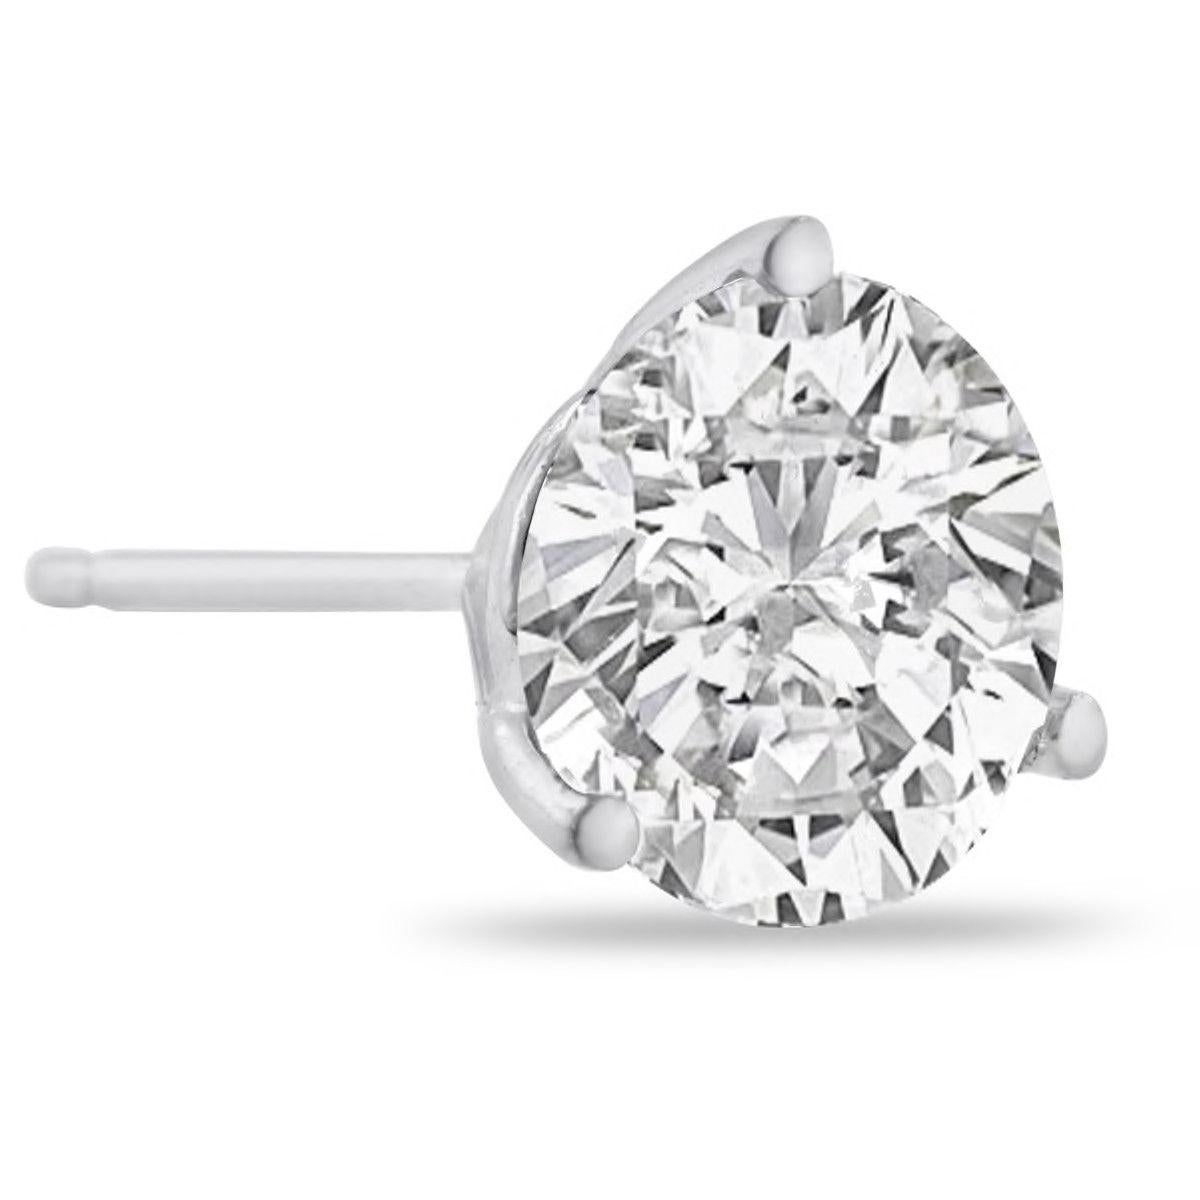 Exquisite 2.00 Carats VS1 Moissanite 14K Solid White Gold Martini Stud Earrings

Amazing looking piece!

Total Round Cut Moissanites Weight is: 2.00 Carats (both earrings) VS1 / G-H

Moissanite Measures: 6.5mm

Total Earrings Weight is: 1.3